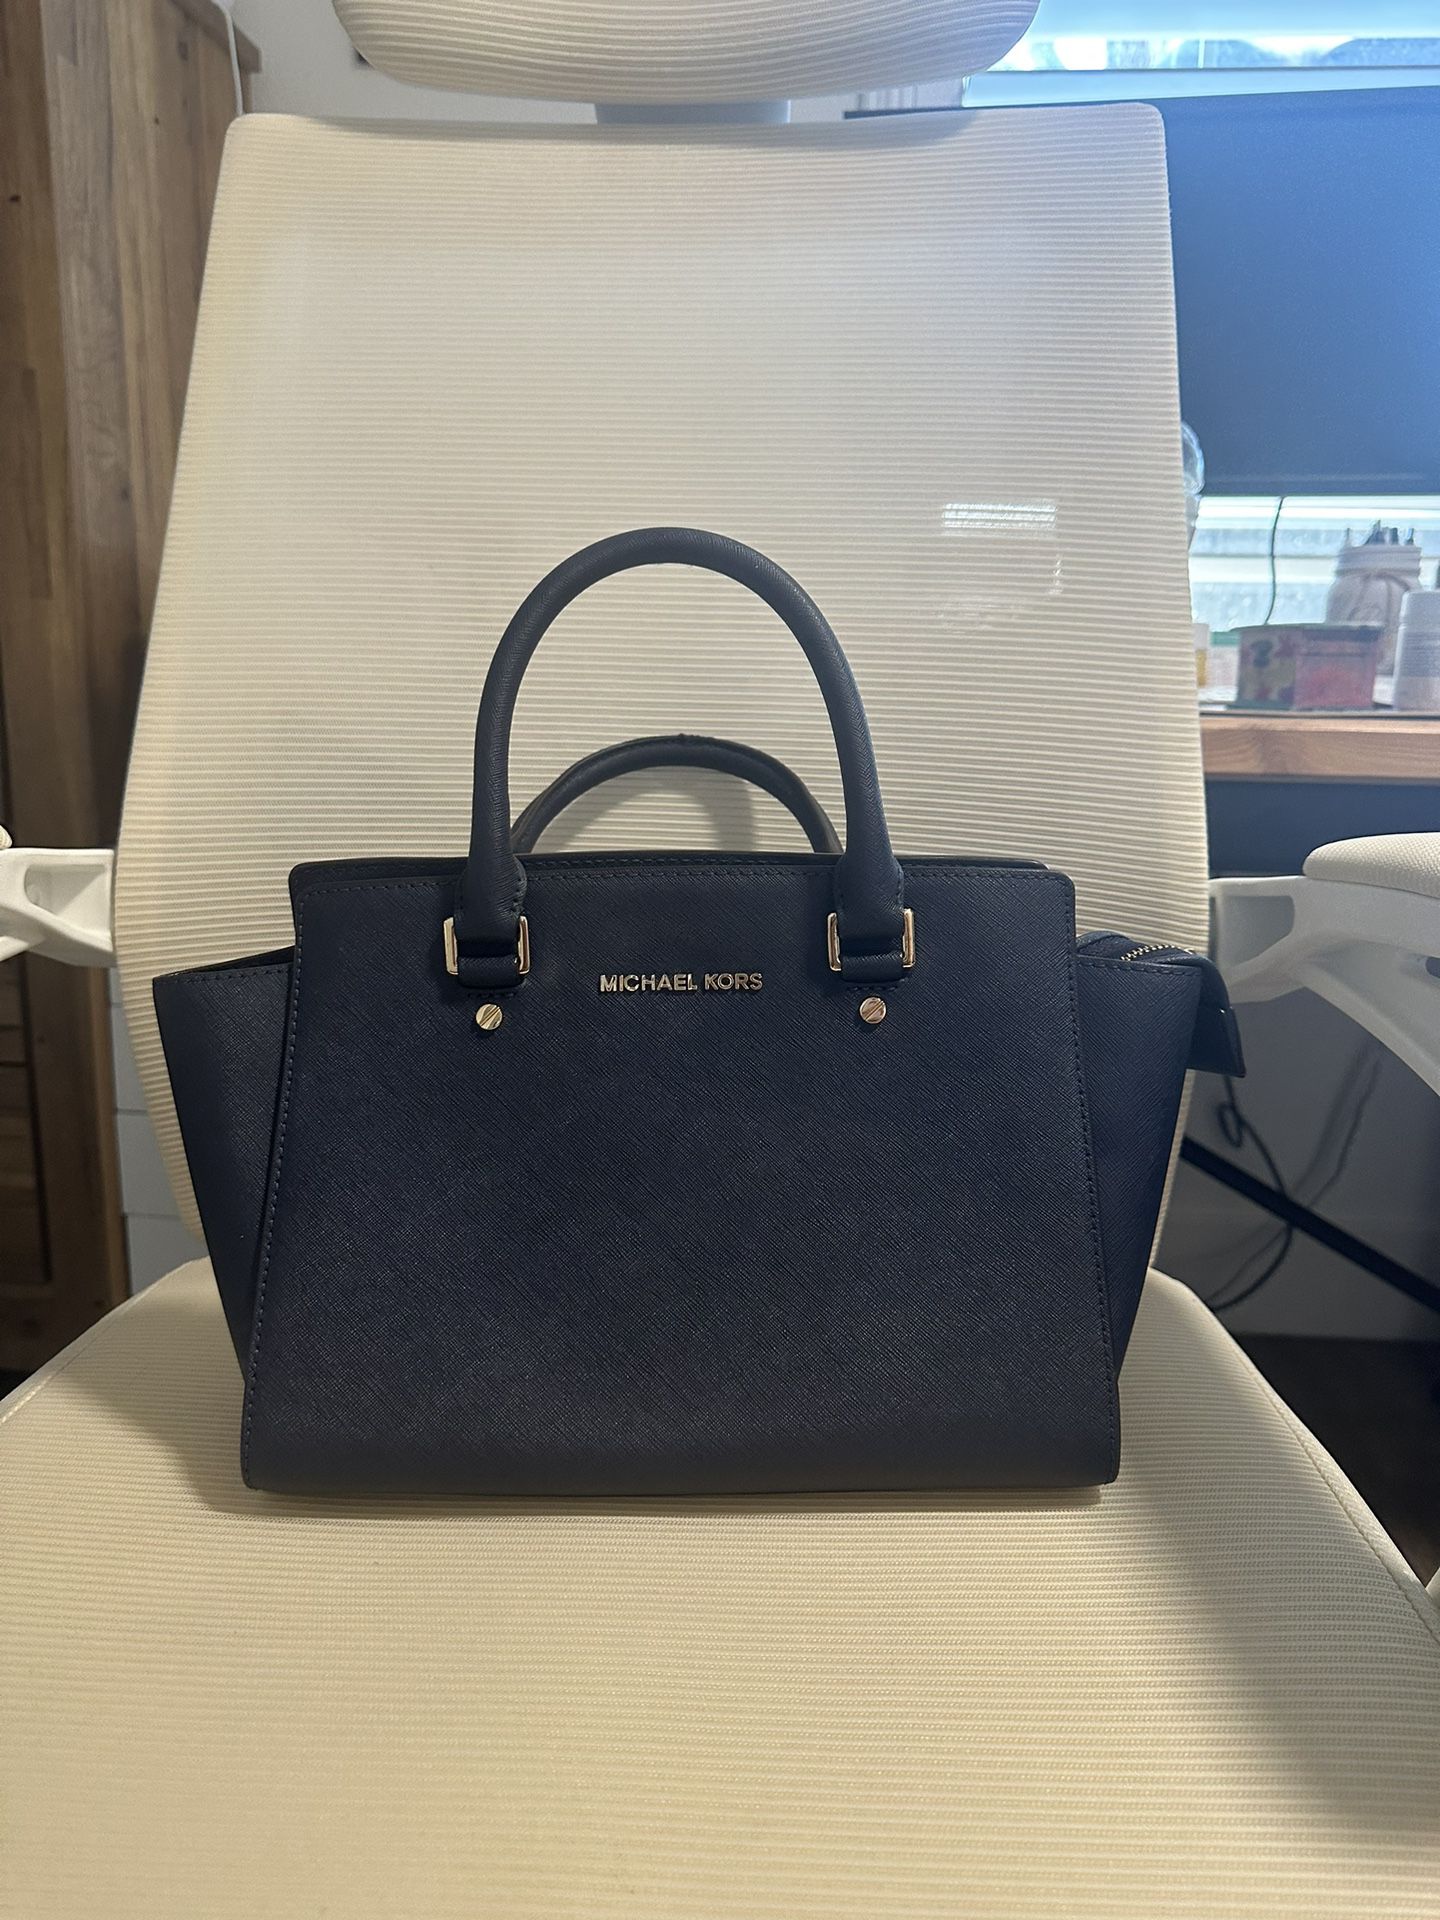 Michael Kors Blue Purse for Sale in Paramount, CA - OfferUp